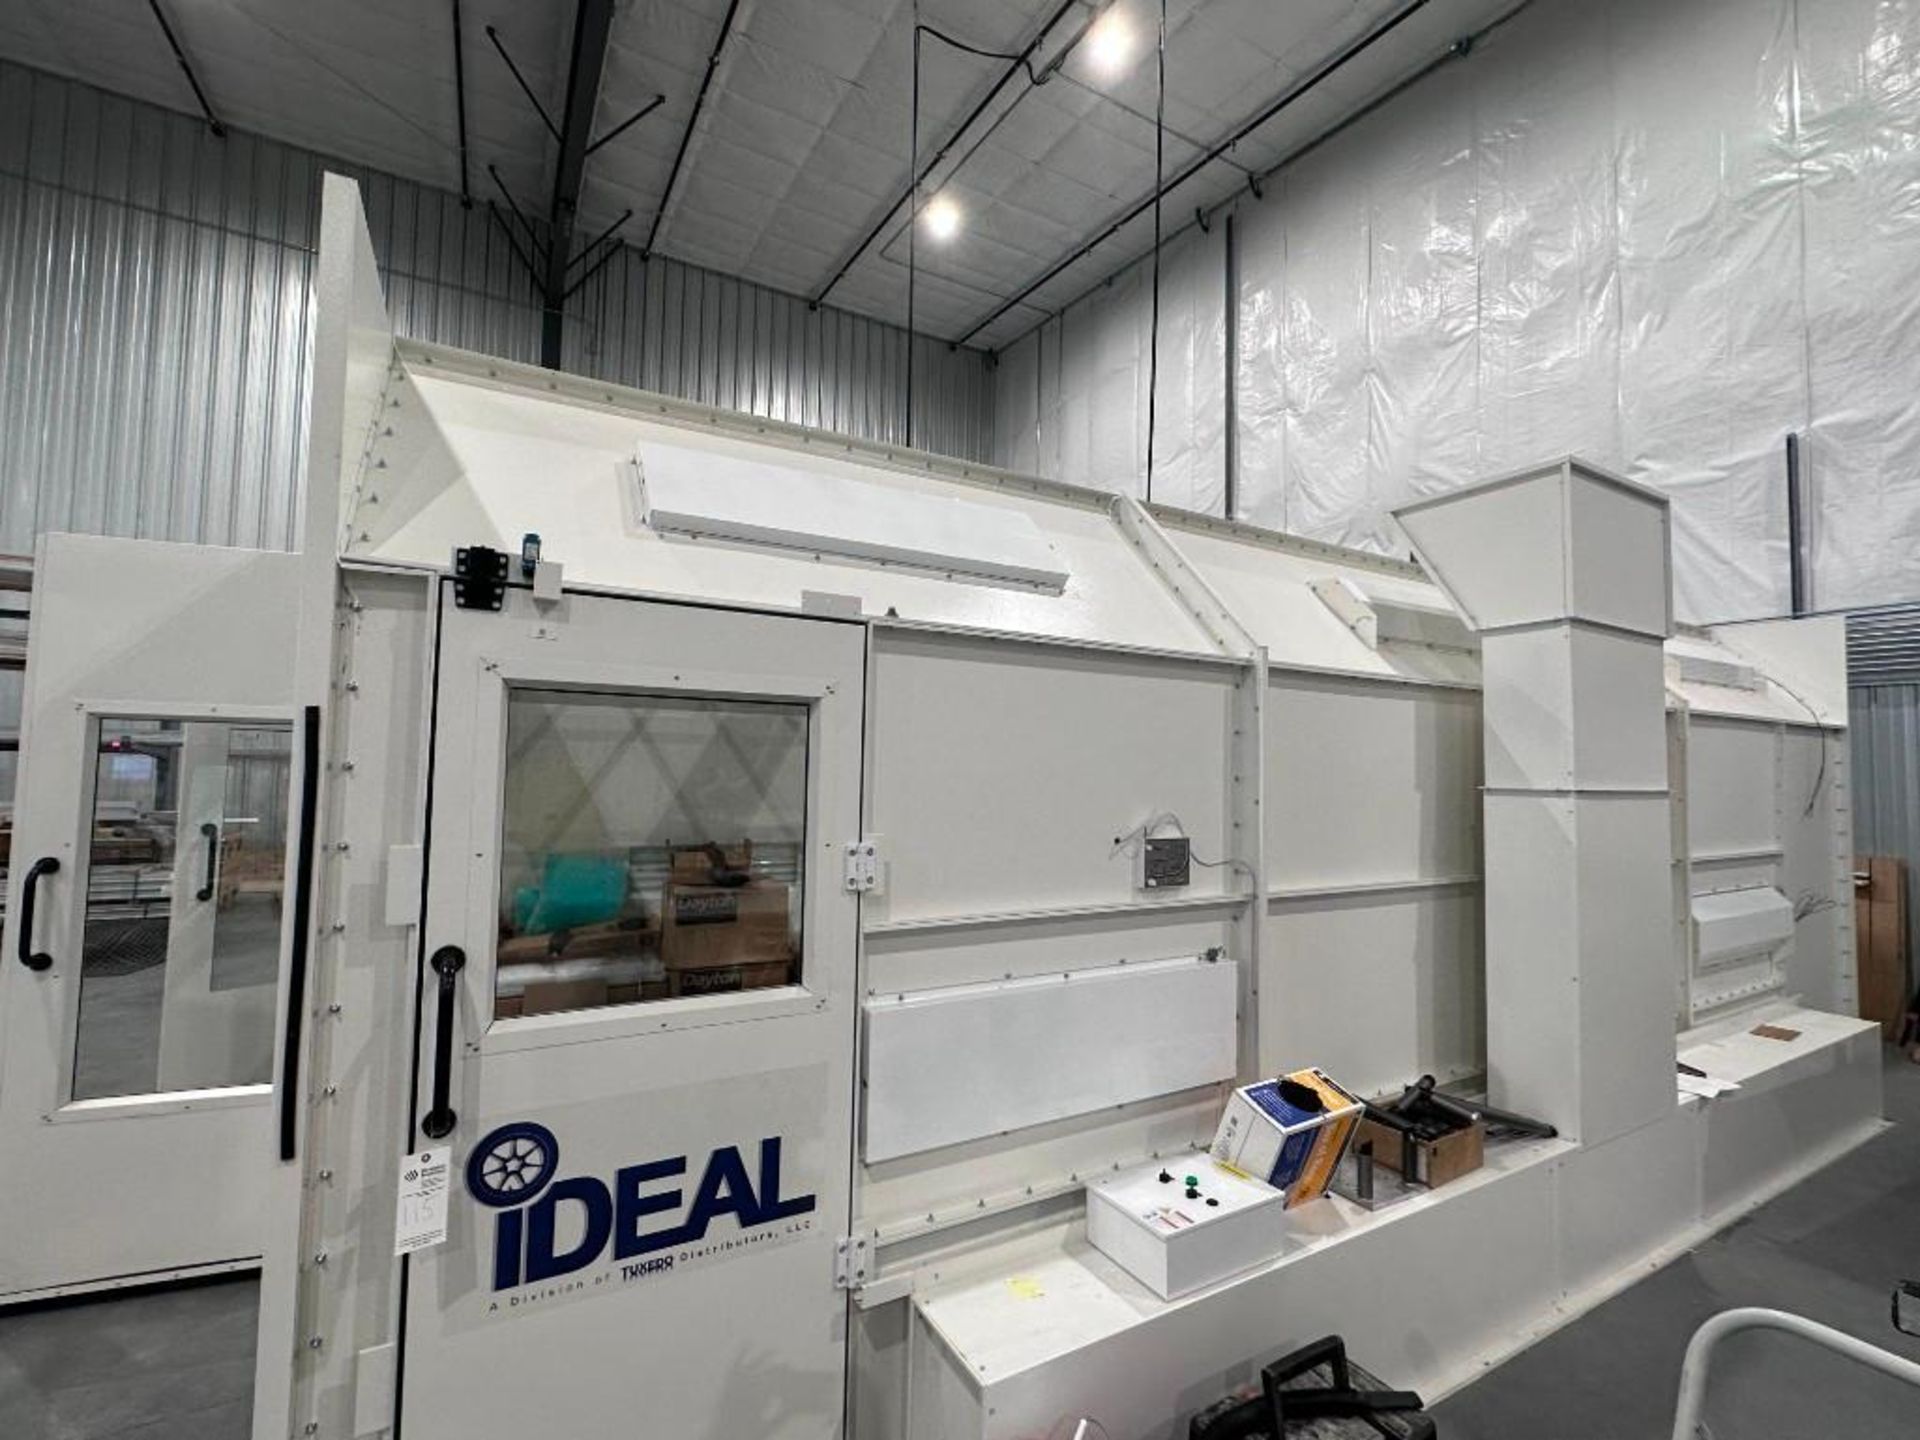 ideal psb sdd26b ak paint booth with side down draft